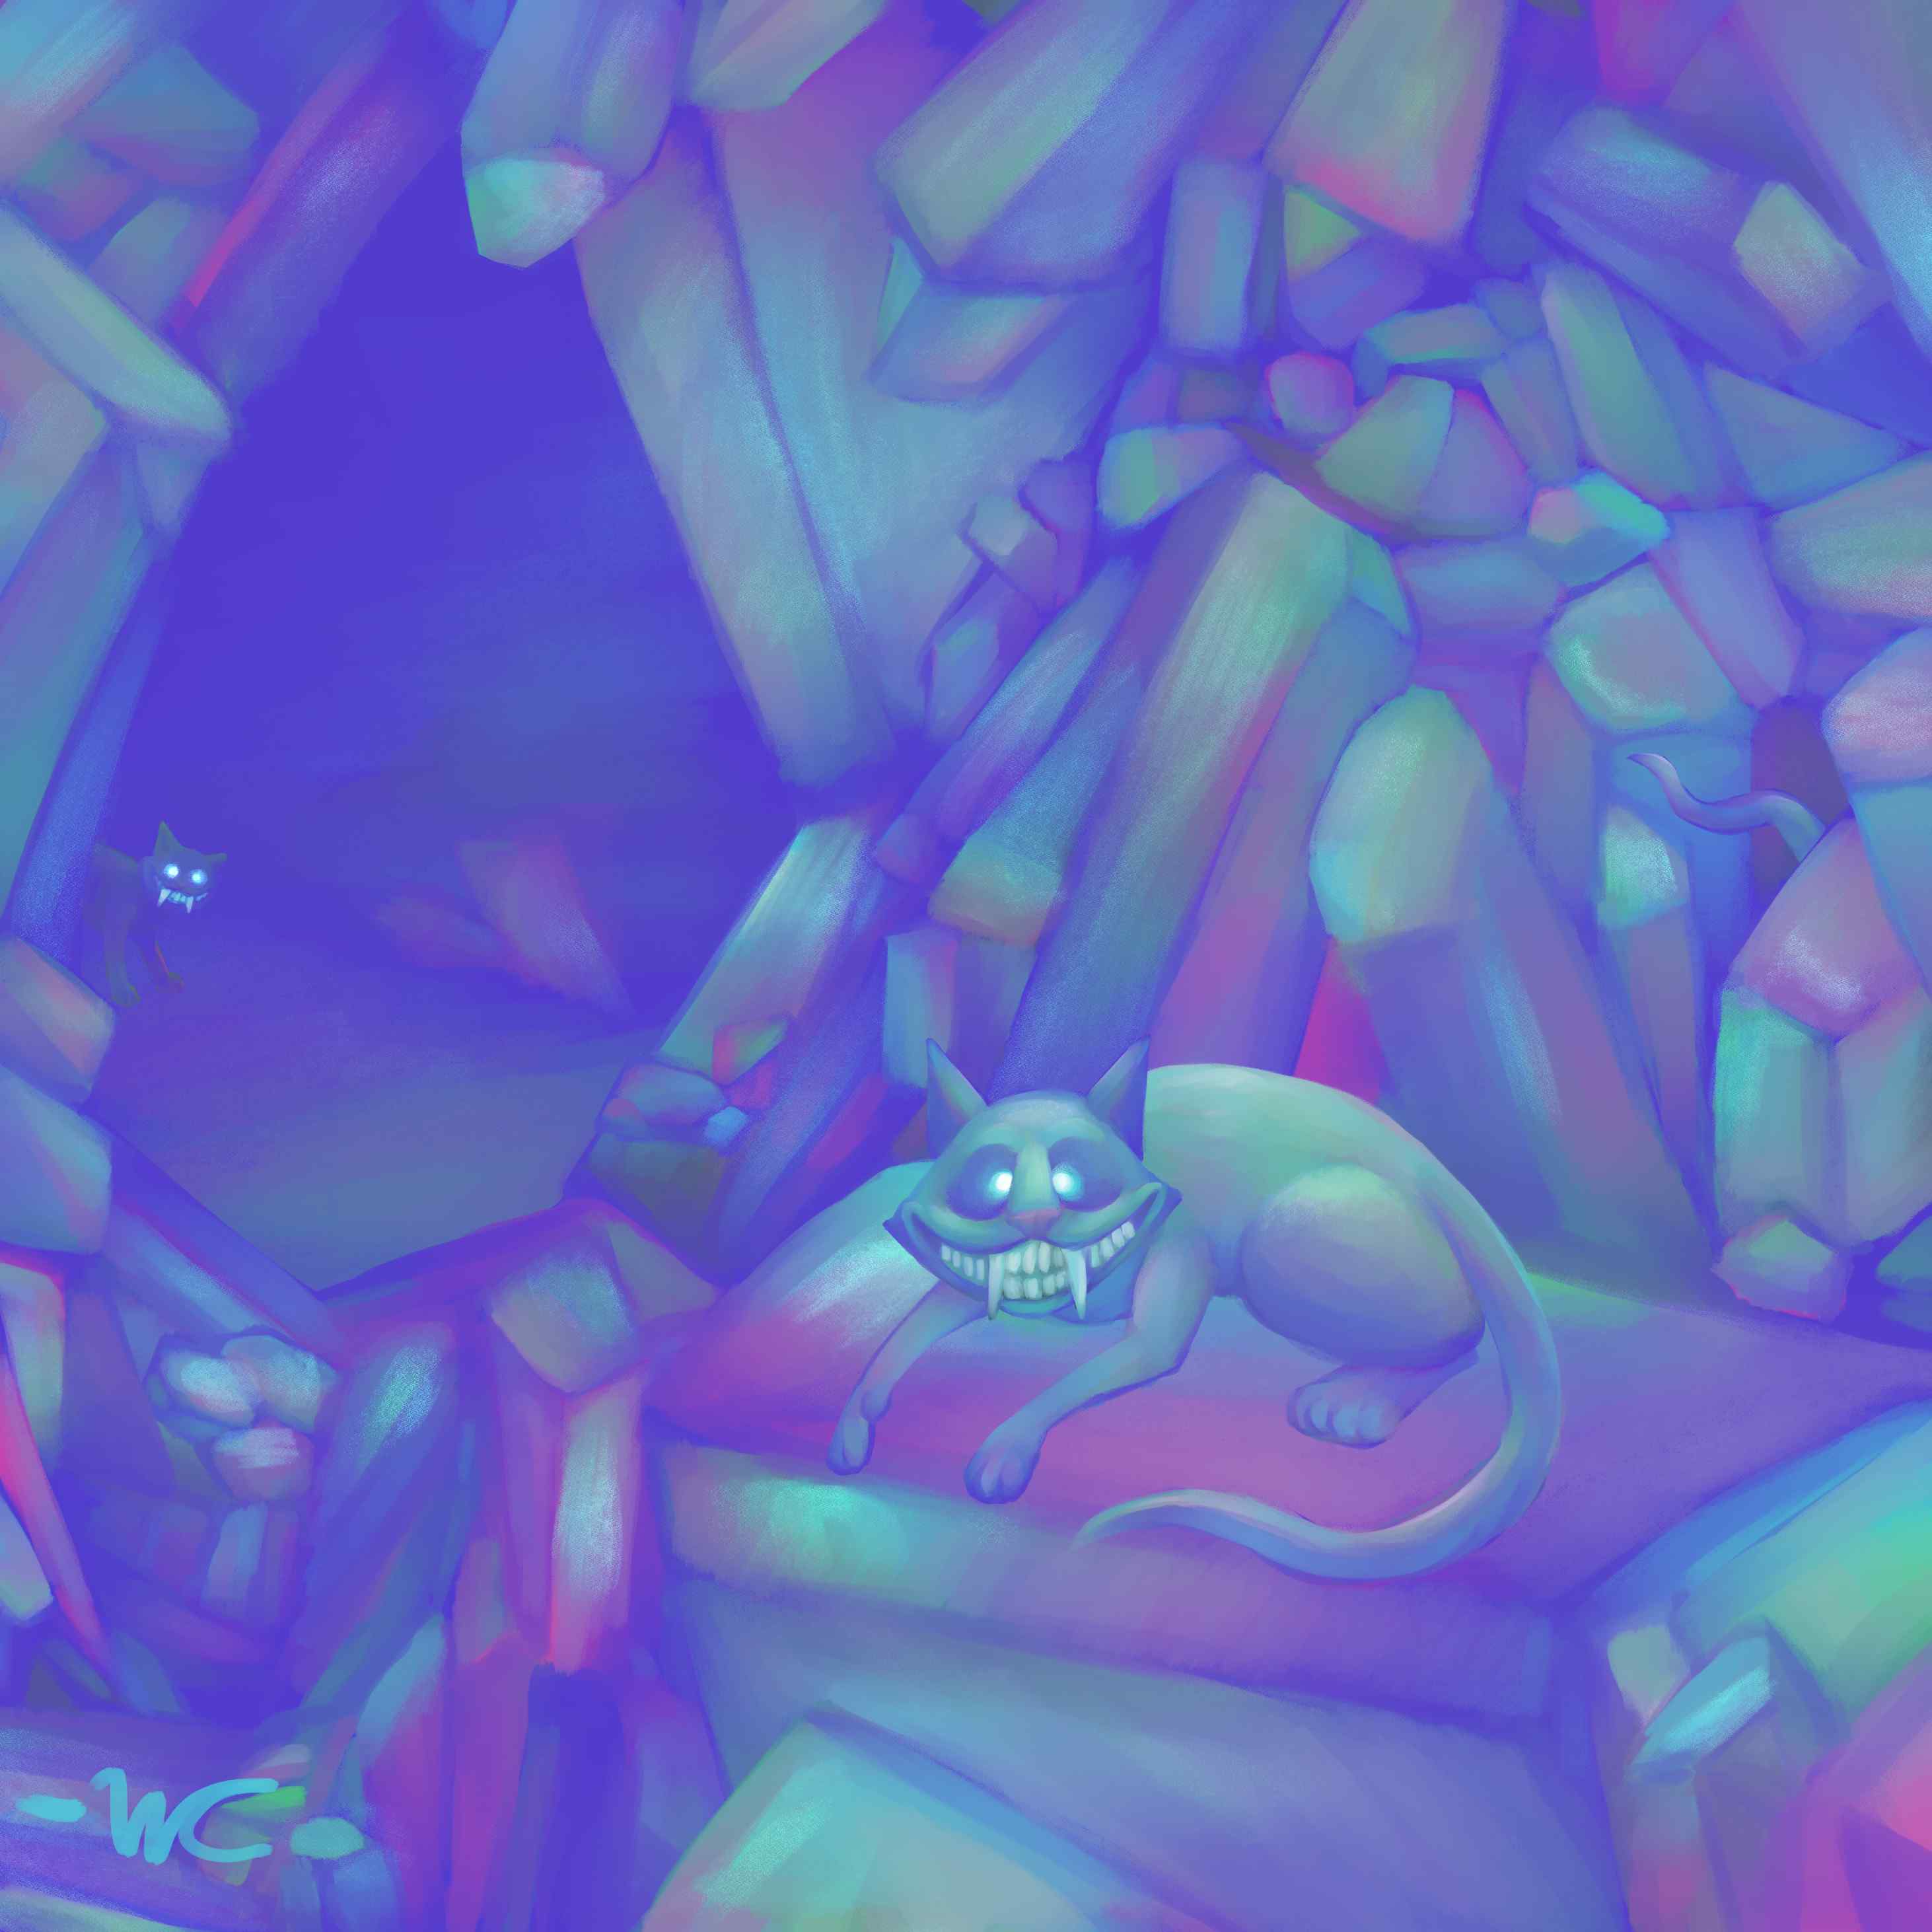 A digital painting of the interior of a crystal cave. Sat atop one crystal is a somewhat creepy looking cat with a big grin and glowing blue eyes. You can also see one in the background; obscured by the dark. The entire painting uses a limited palette of bright blue, pink and green, electric indigo, and white.